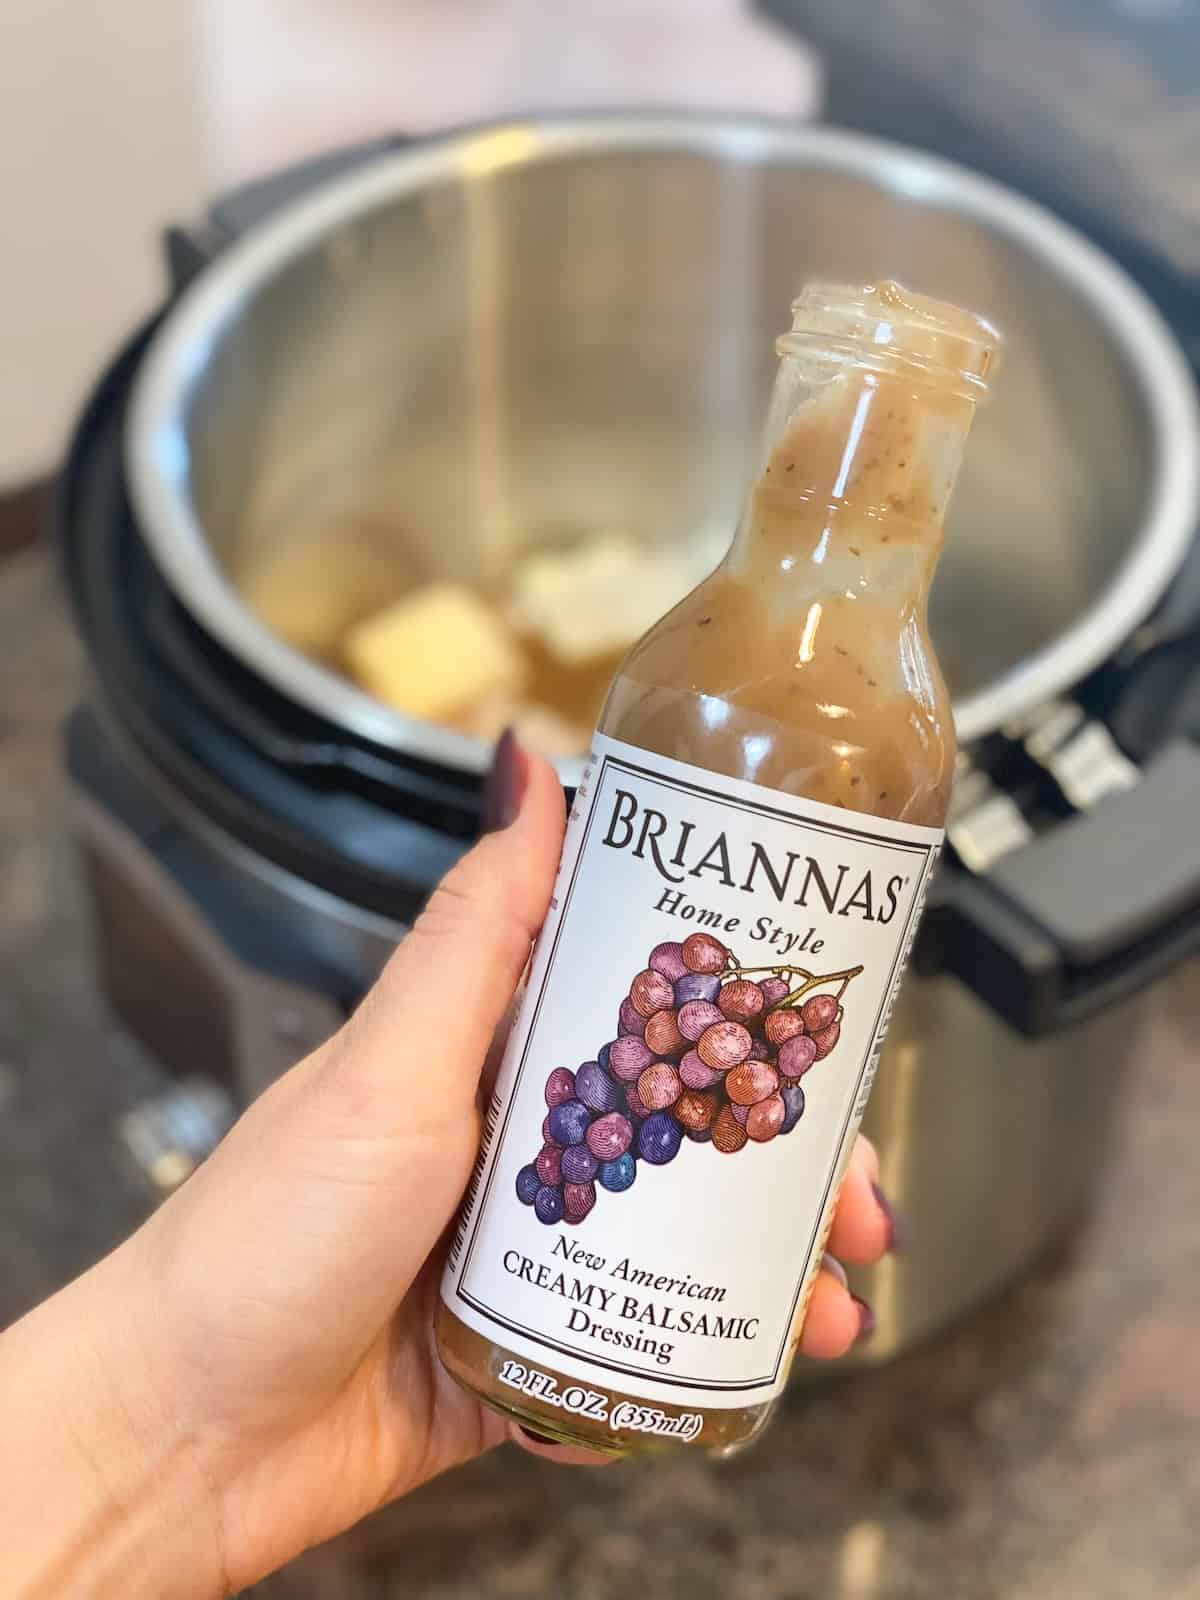 BRIANNAS Creamy Balsamic Dressing in a bottle in a hand